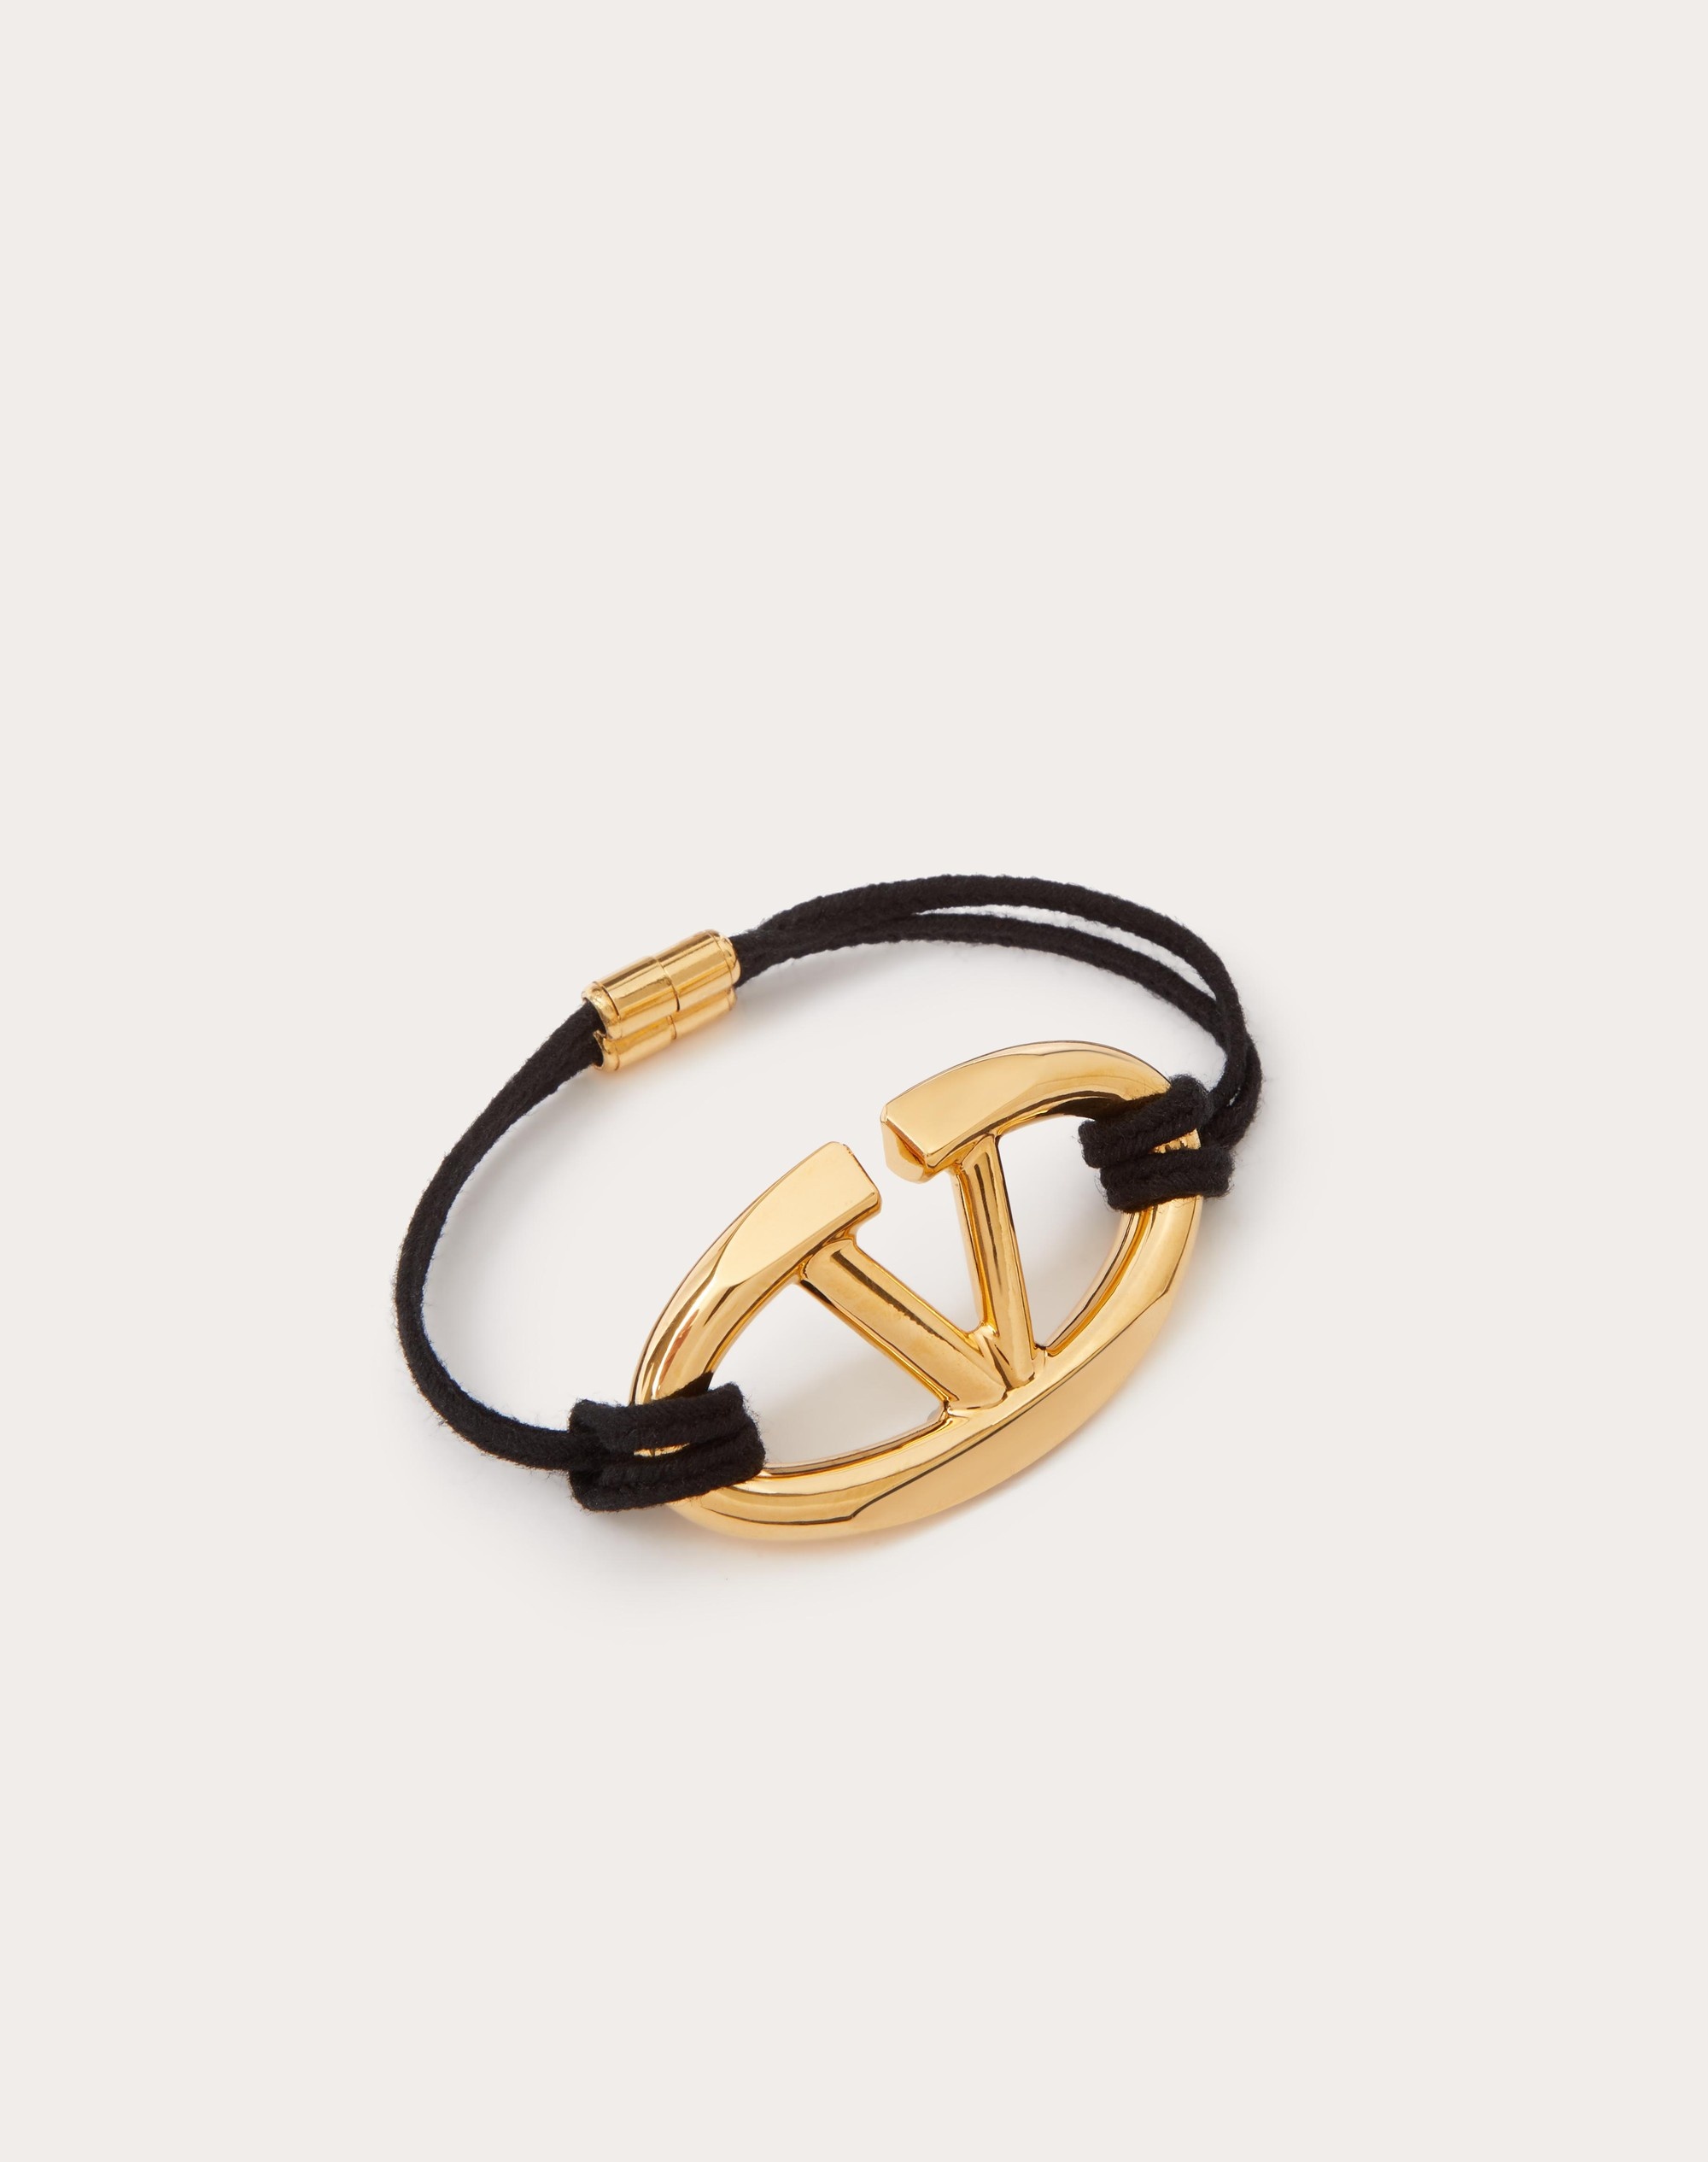 THE BOLD EDITION VLOGO ROPE AND METAL BRACELET - 3